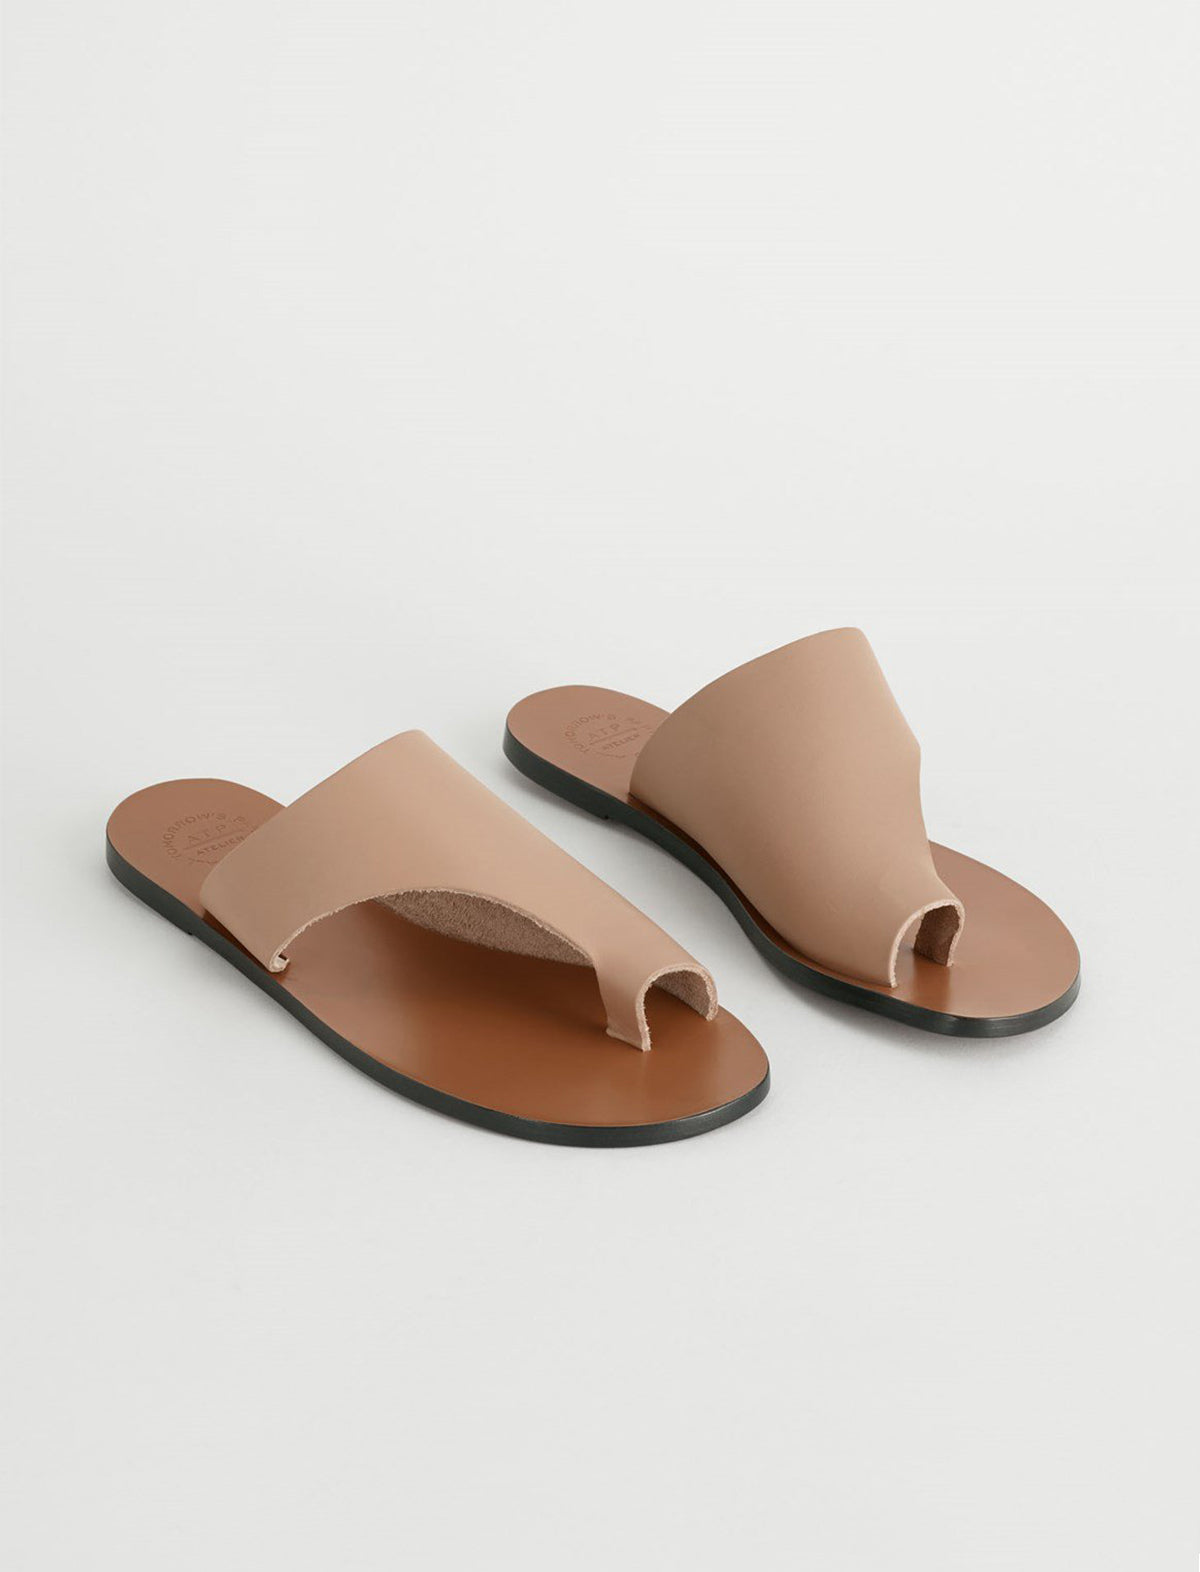 ATP Atelier Rosa Leather Sandals in Almond